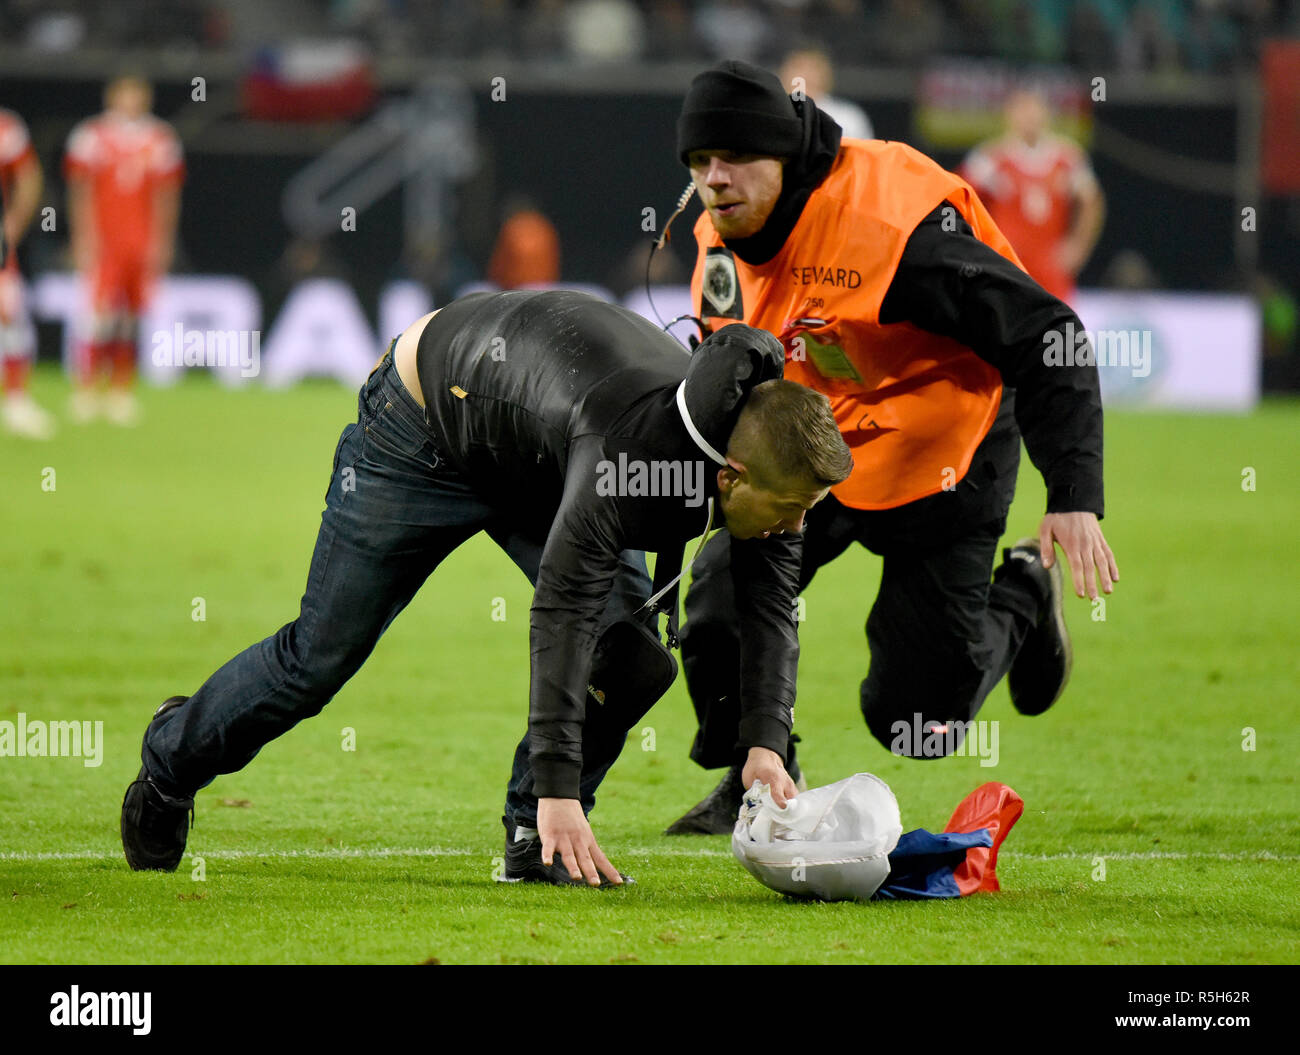 Leipzig, Germany - November 15, 2018. A Russia fan is chased by a steward after running onto the pitch during international friendly Germany vs Russia Stock Photo